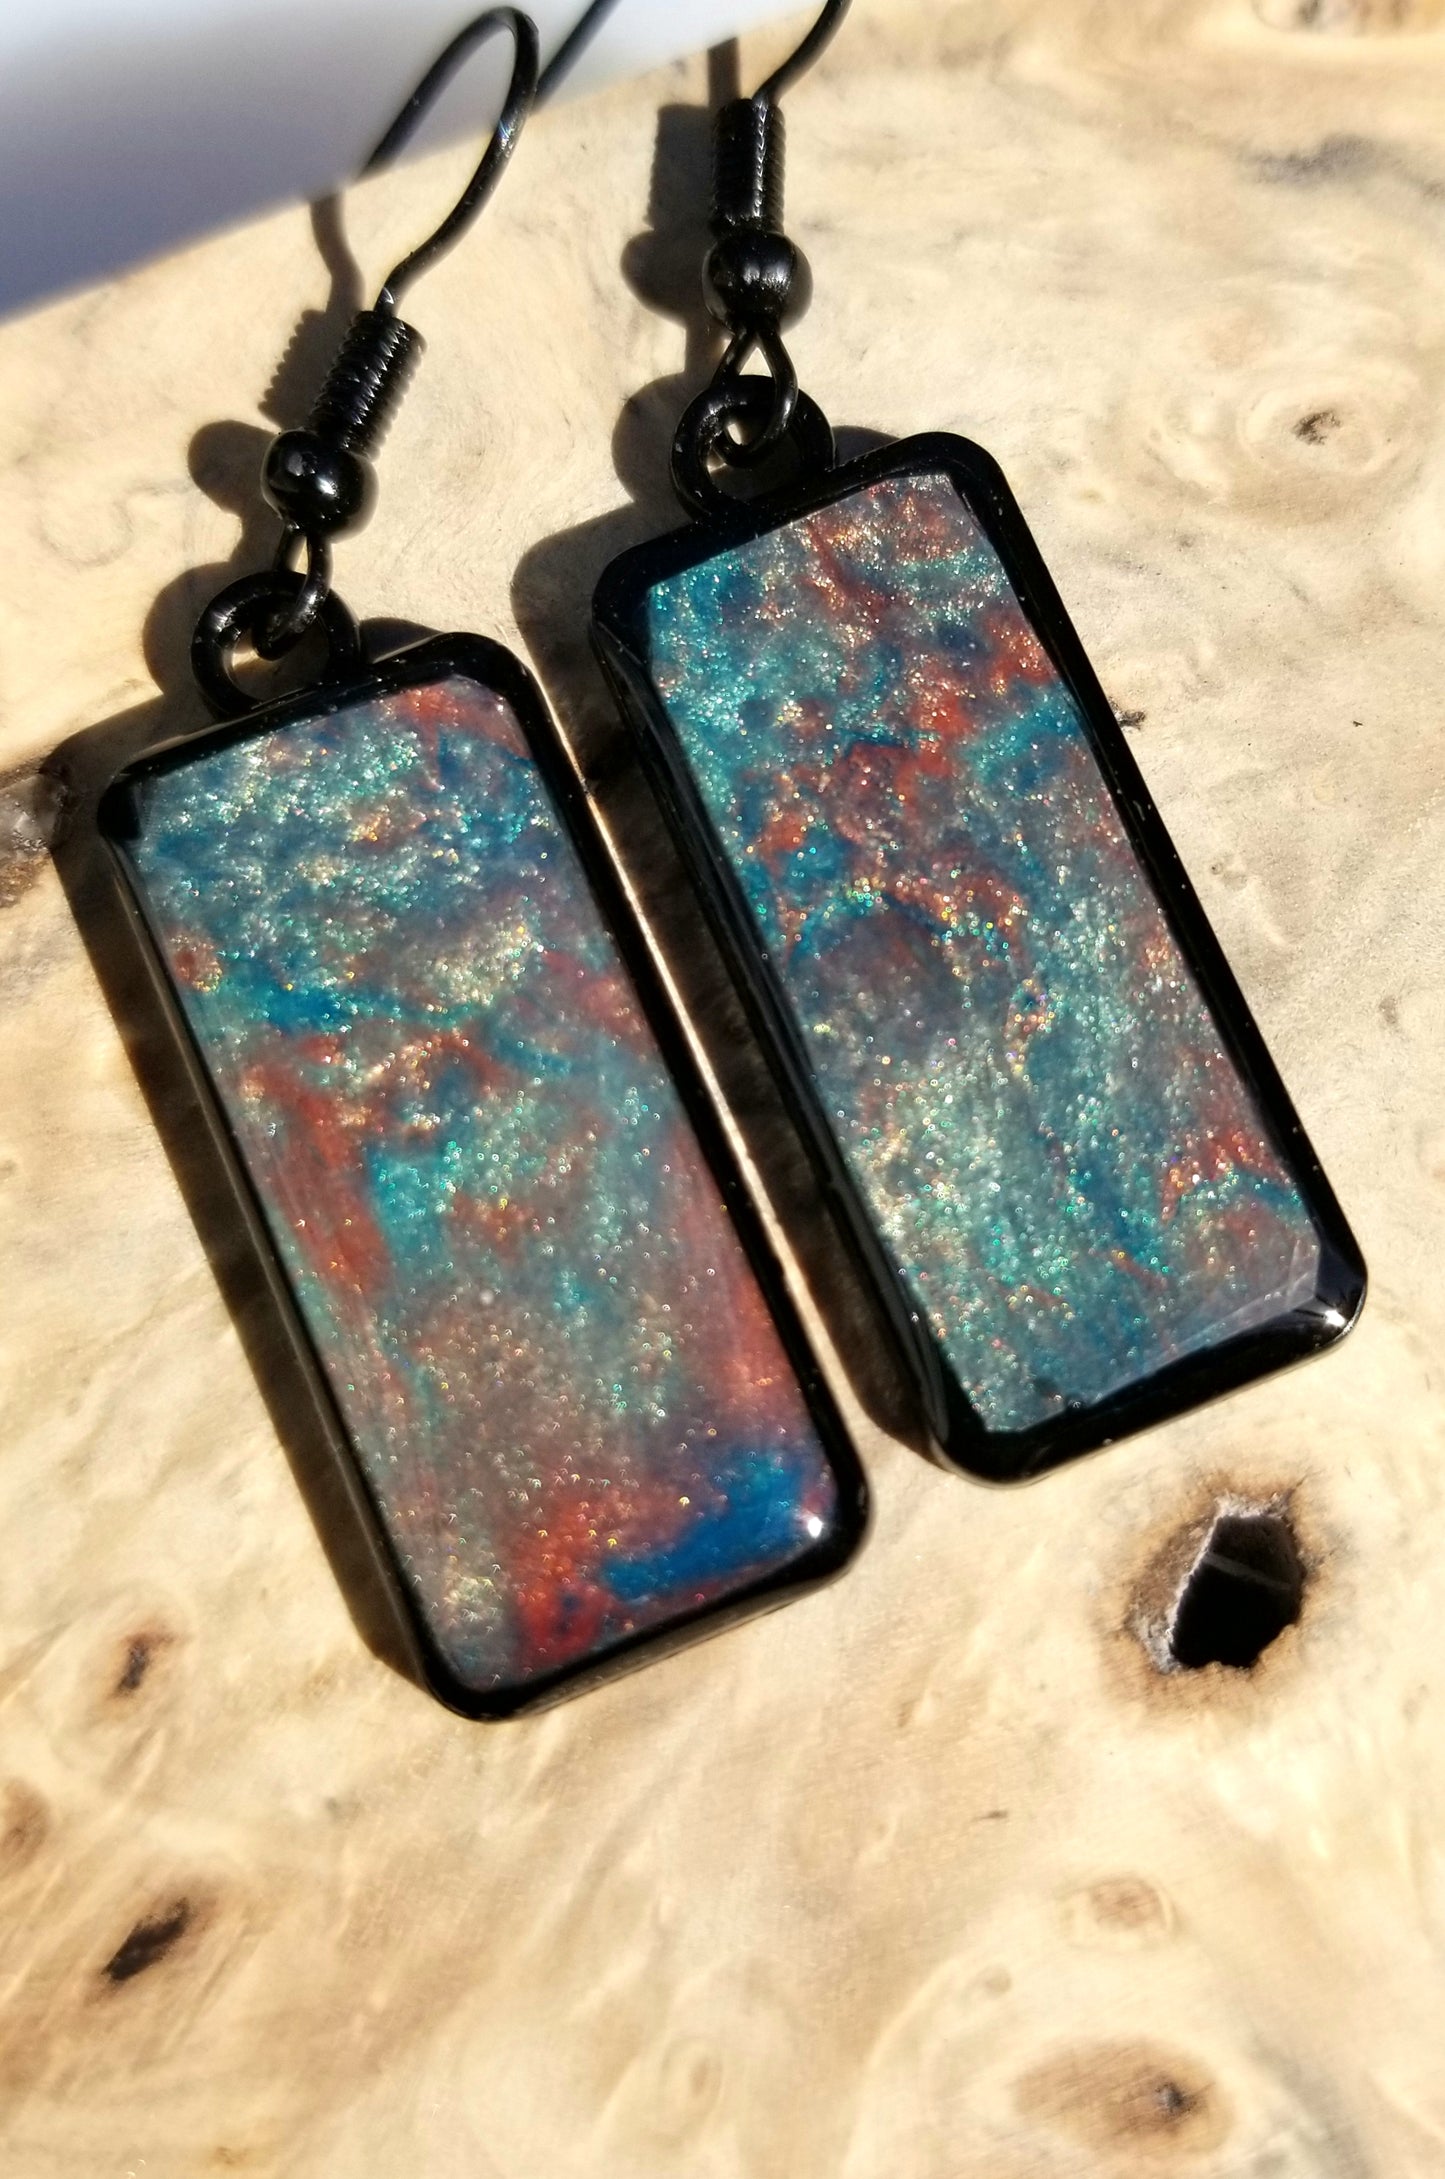 Resin Design with Resin Dome / Silver Tray or Black TrayWire Hook Earrings